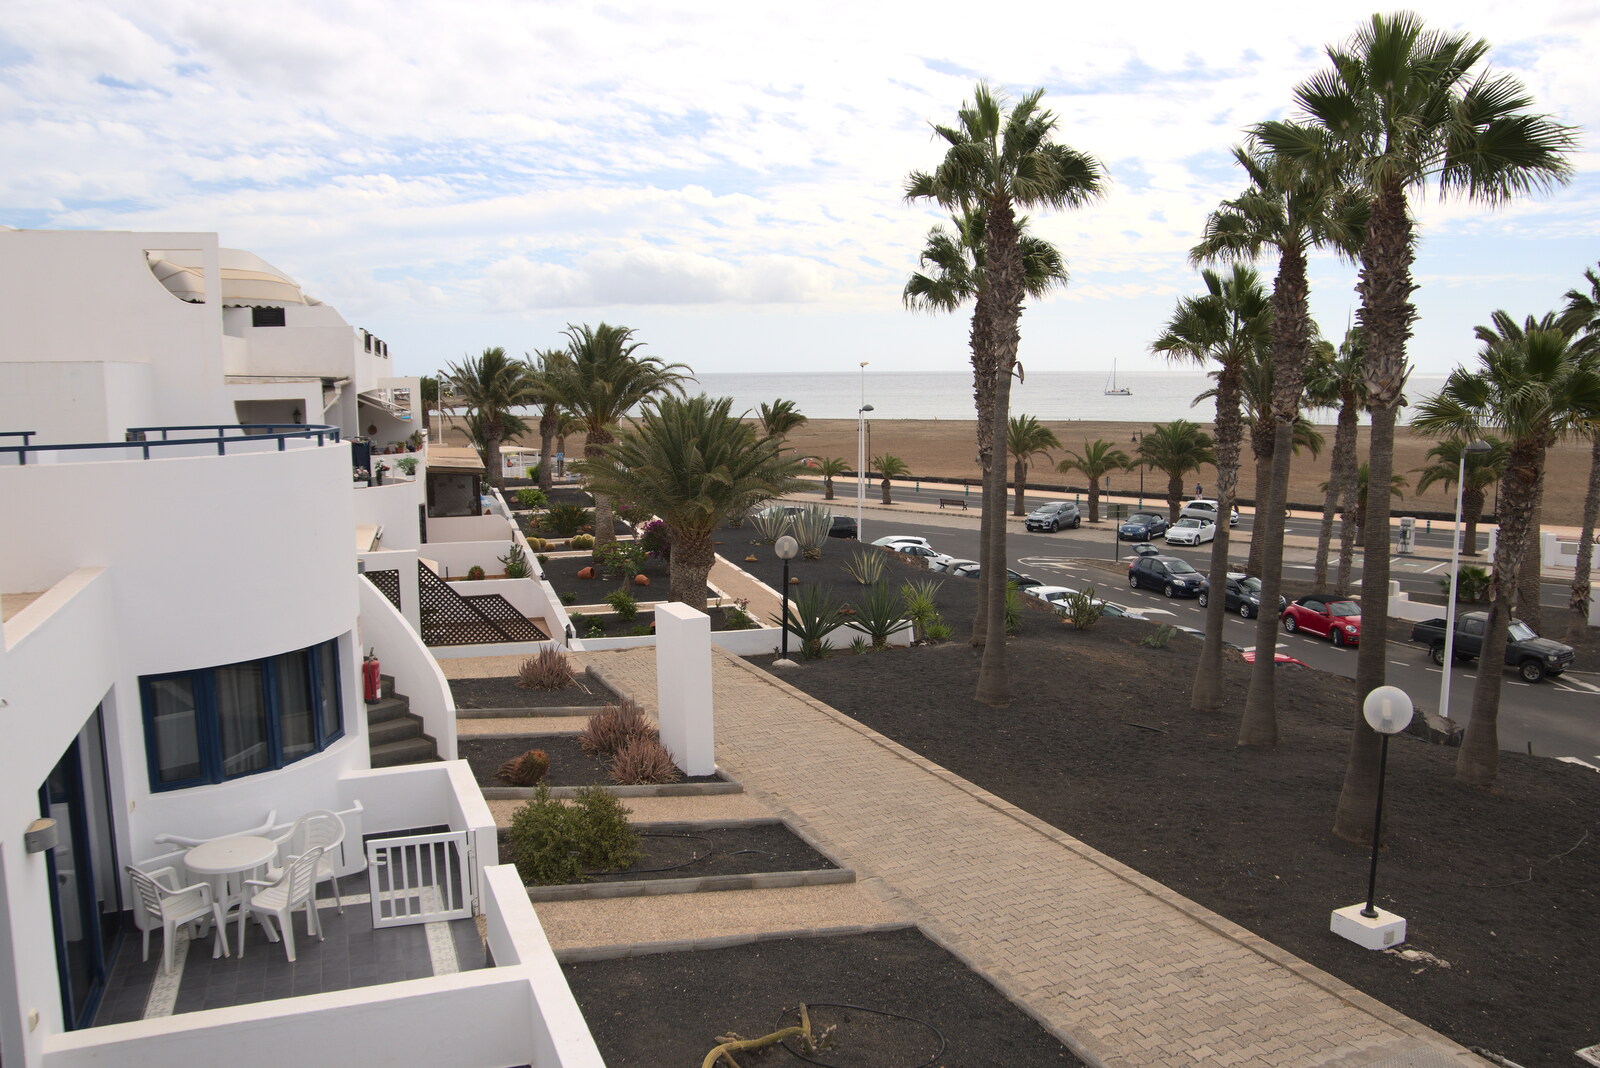 A first view from the apartment from Five Days in Lanzarote, Canary Islands, Spain - 24th October 2021